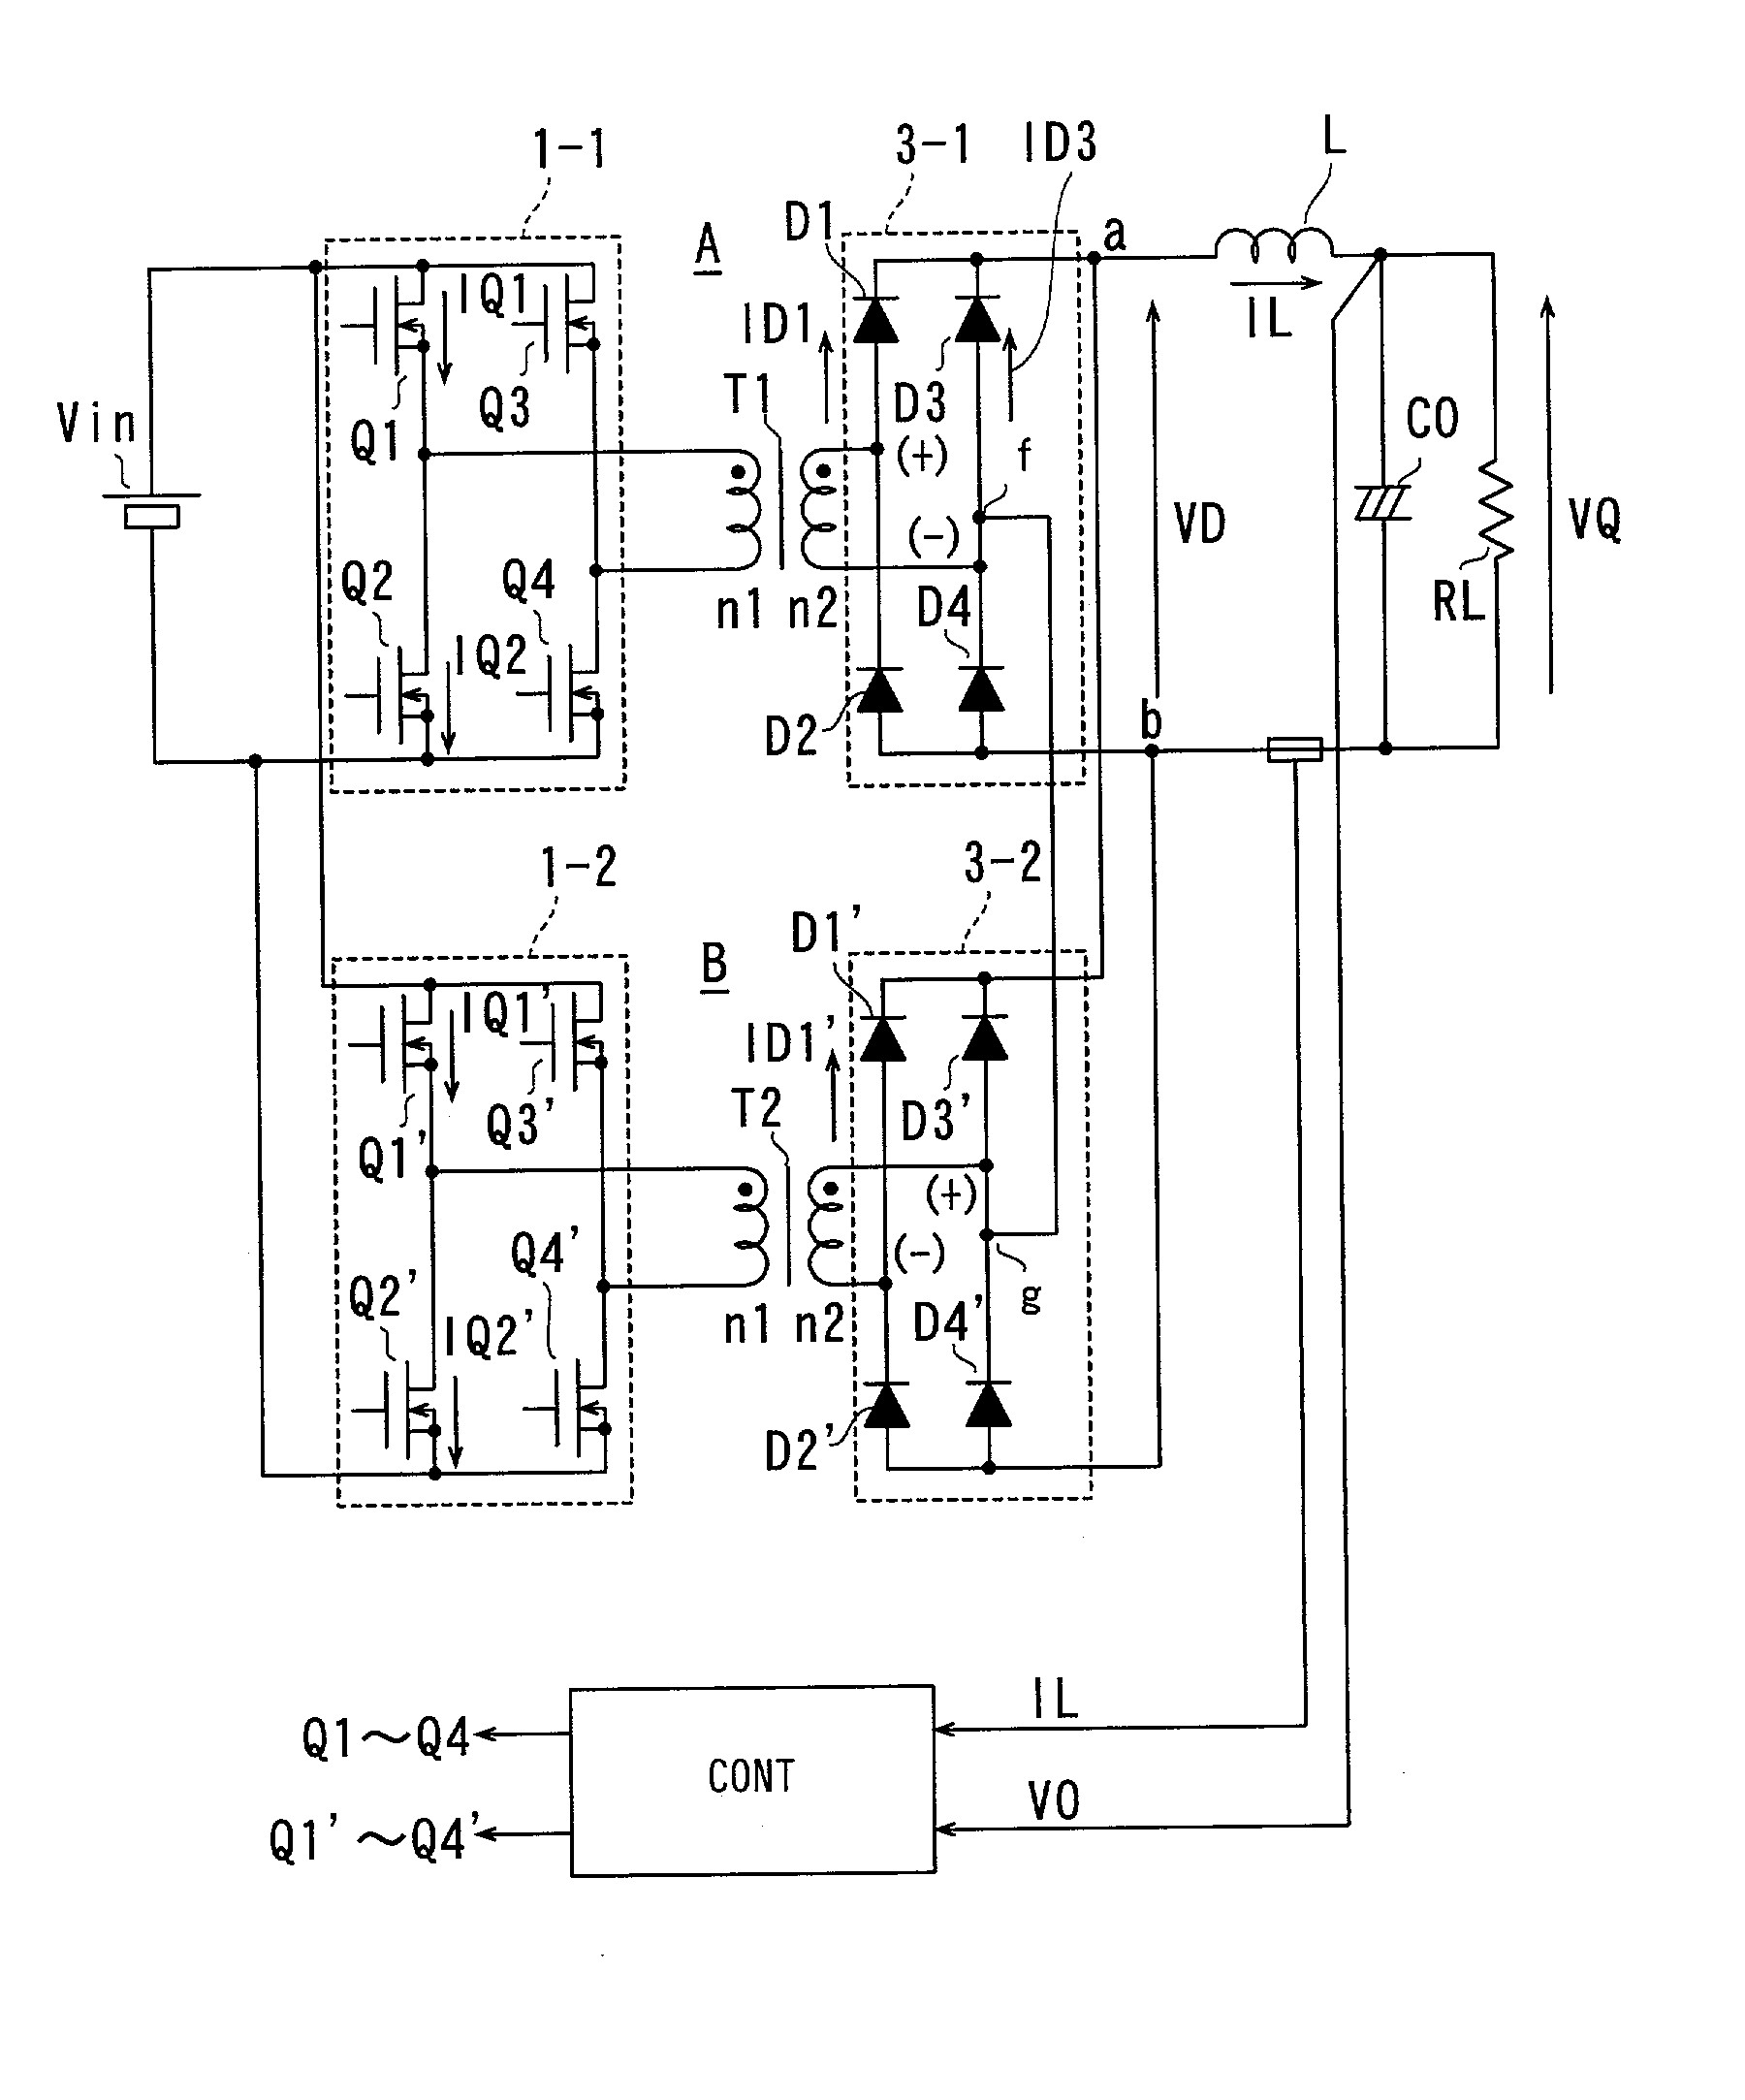 DC power supply device with constant power output level